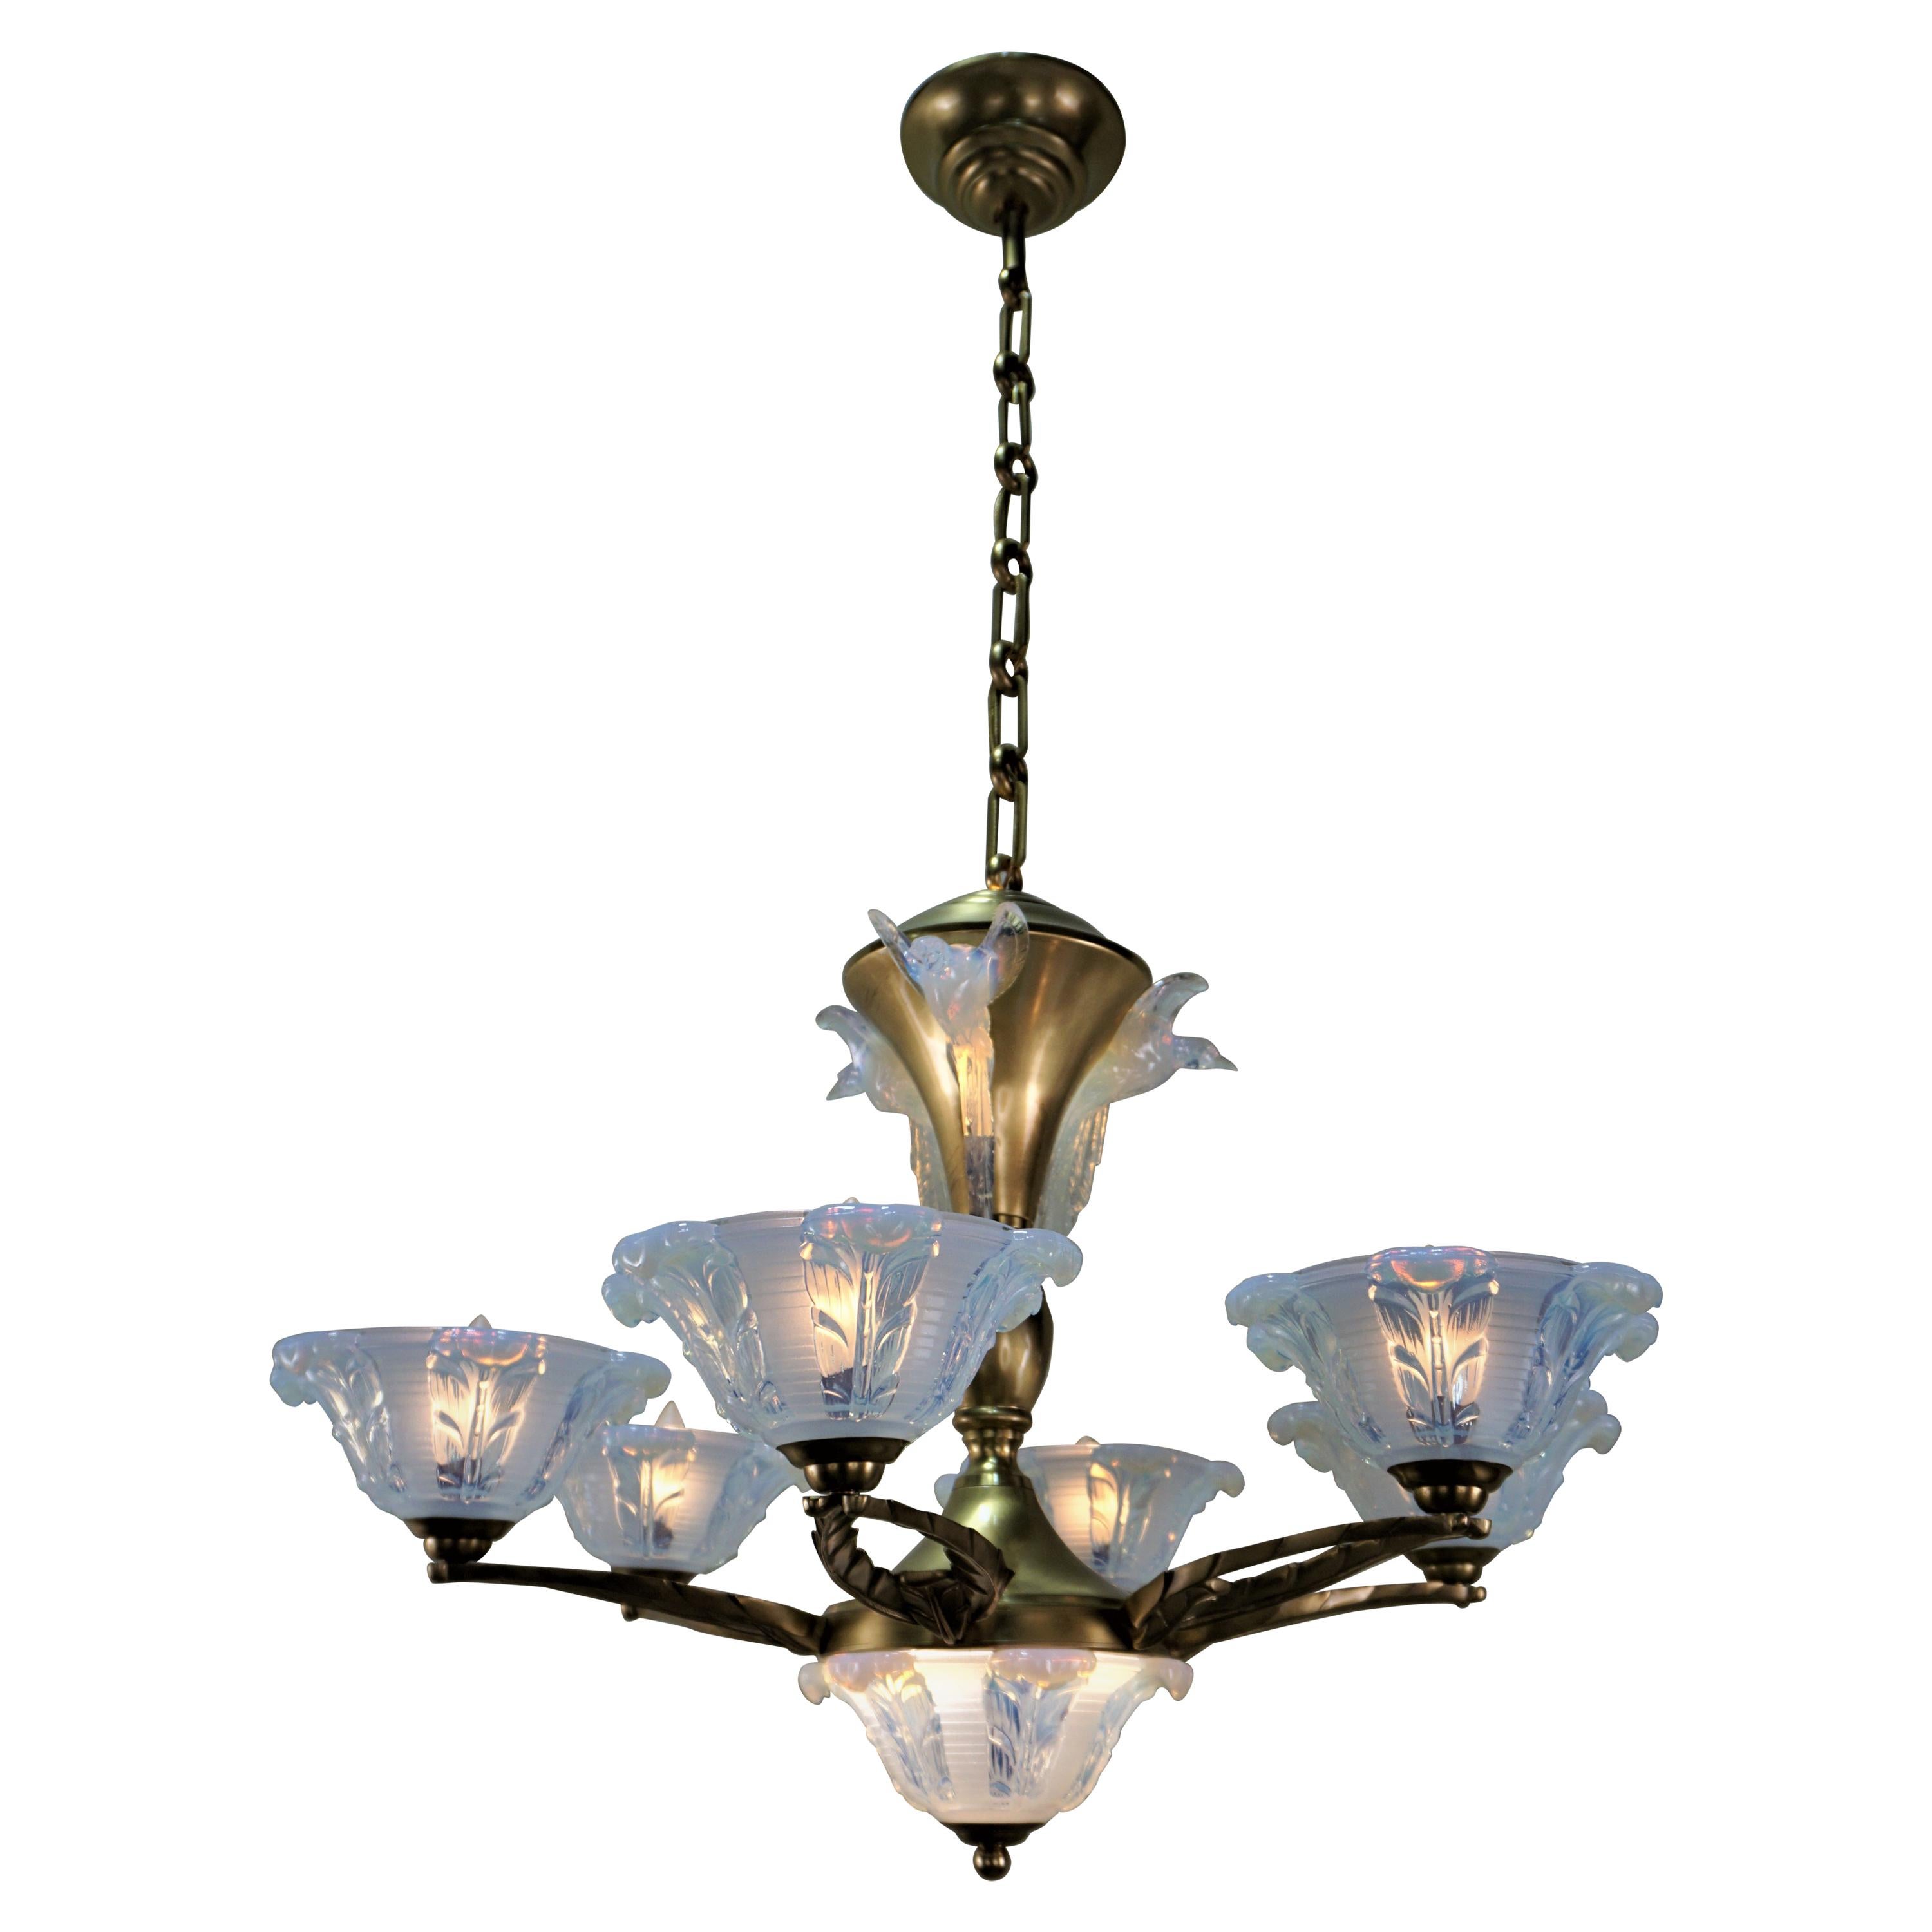 French Art Deco Chandelier with Opalescent Glass Shades by Ezan